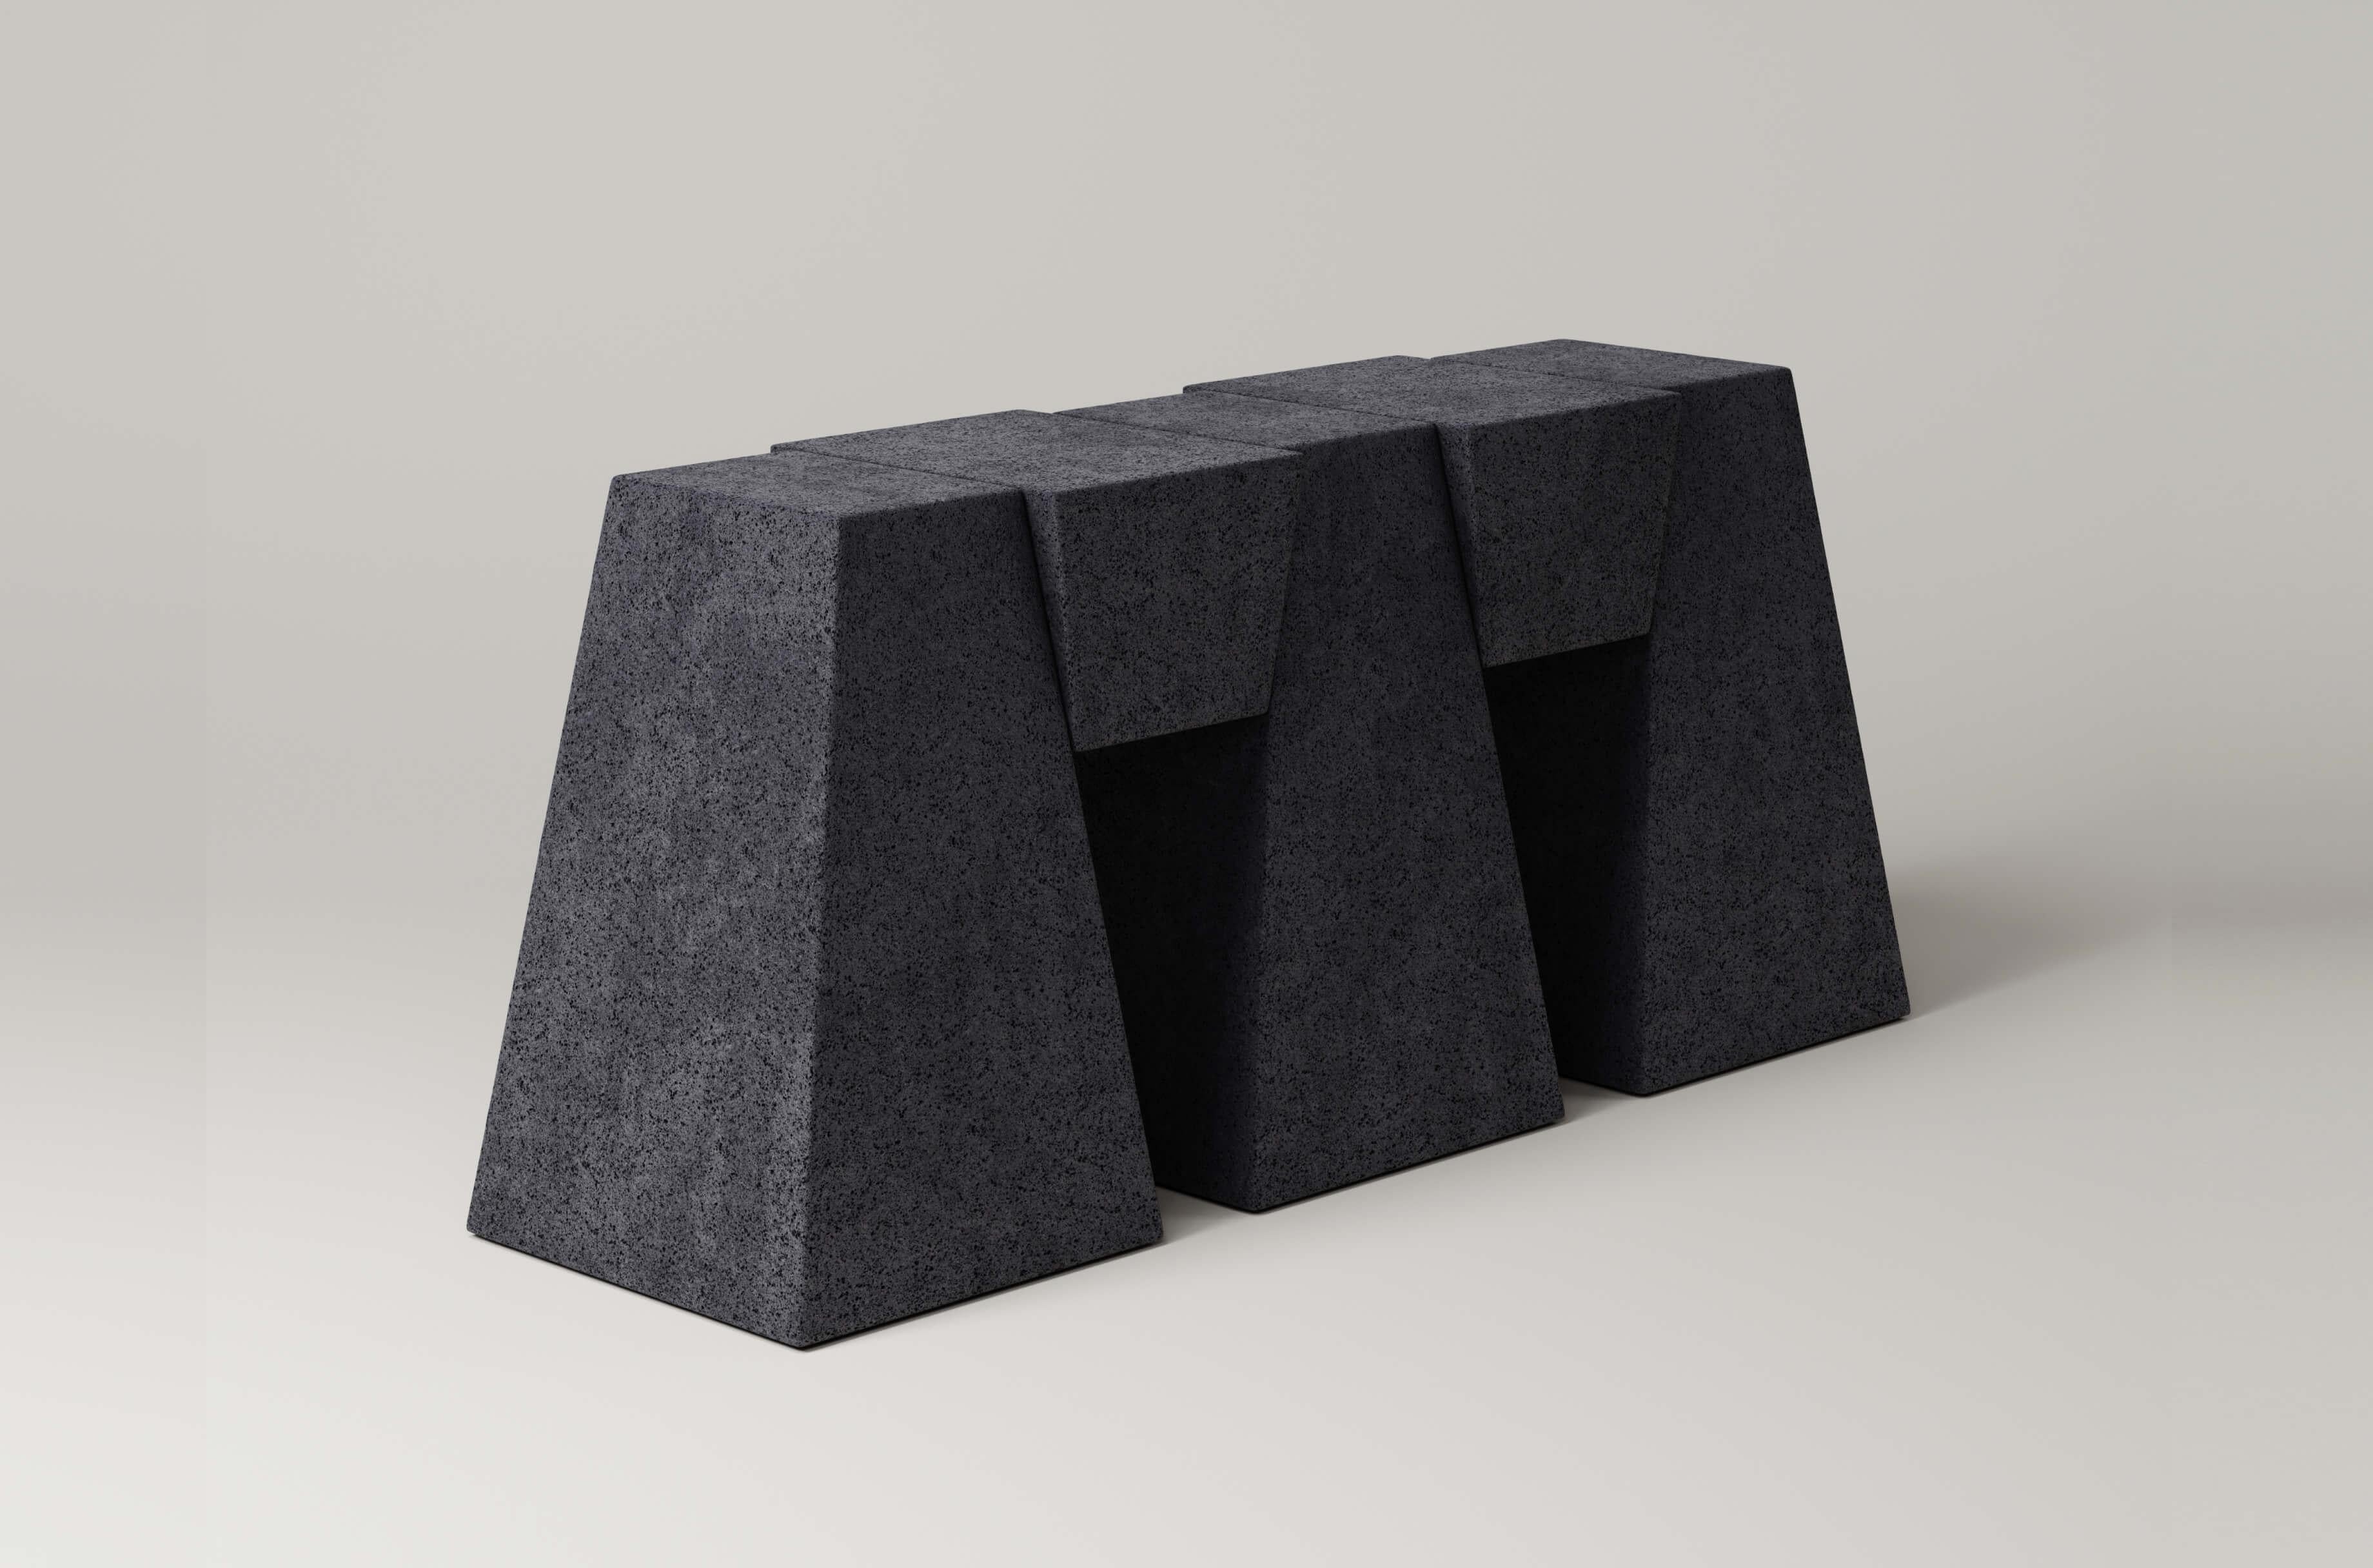  M_006 Console by Monolith Studio, Travertine In New Condition For Sale In Brooklyn, NY